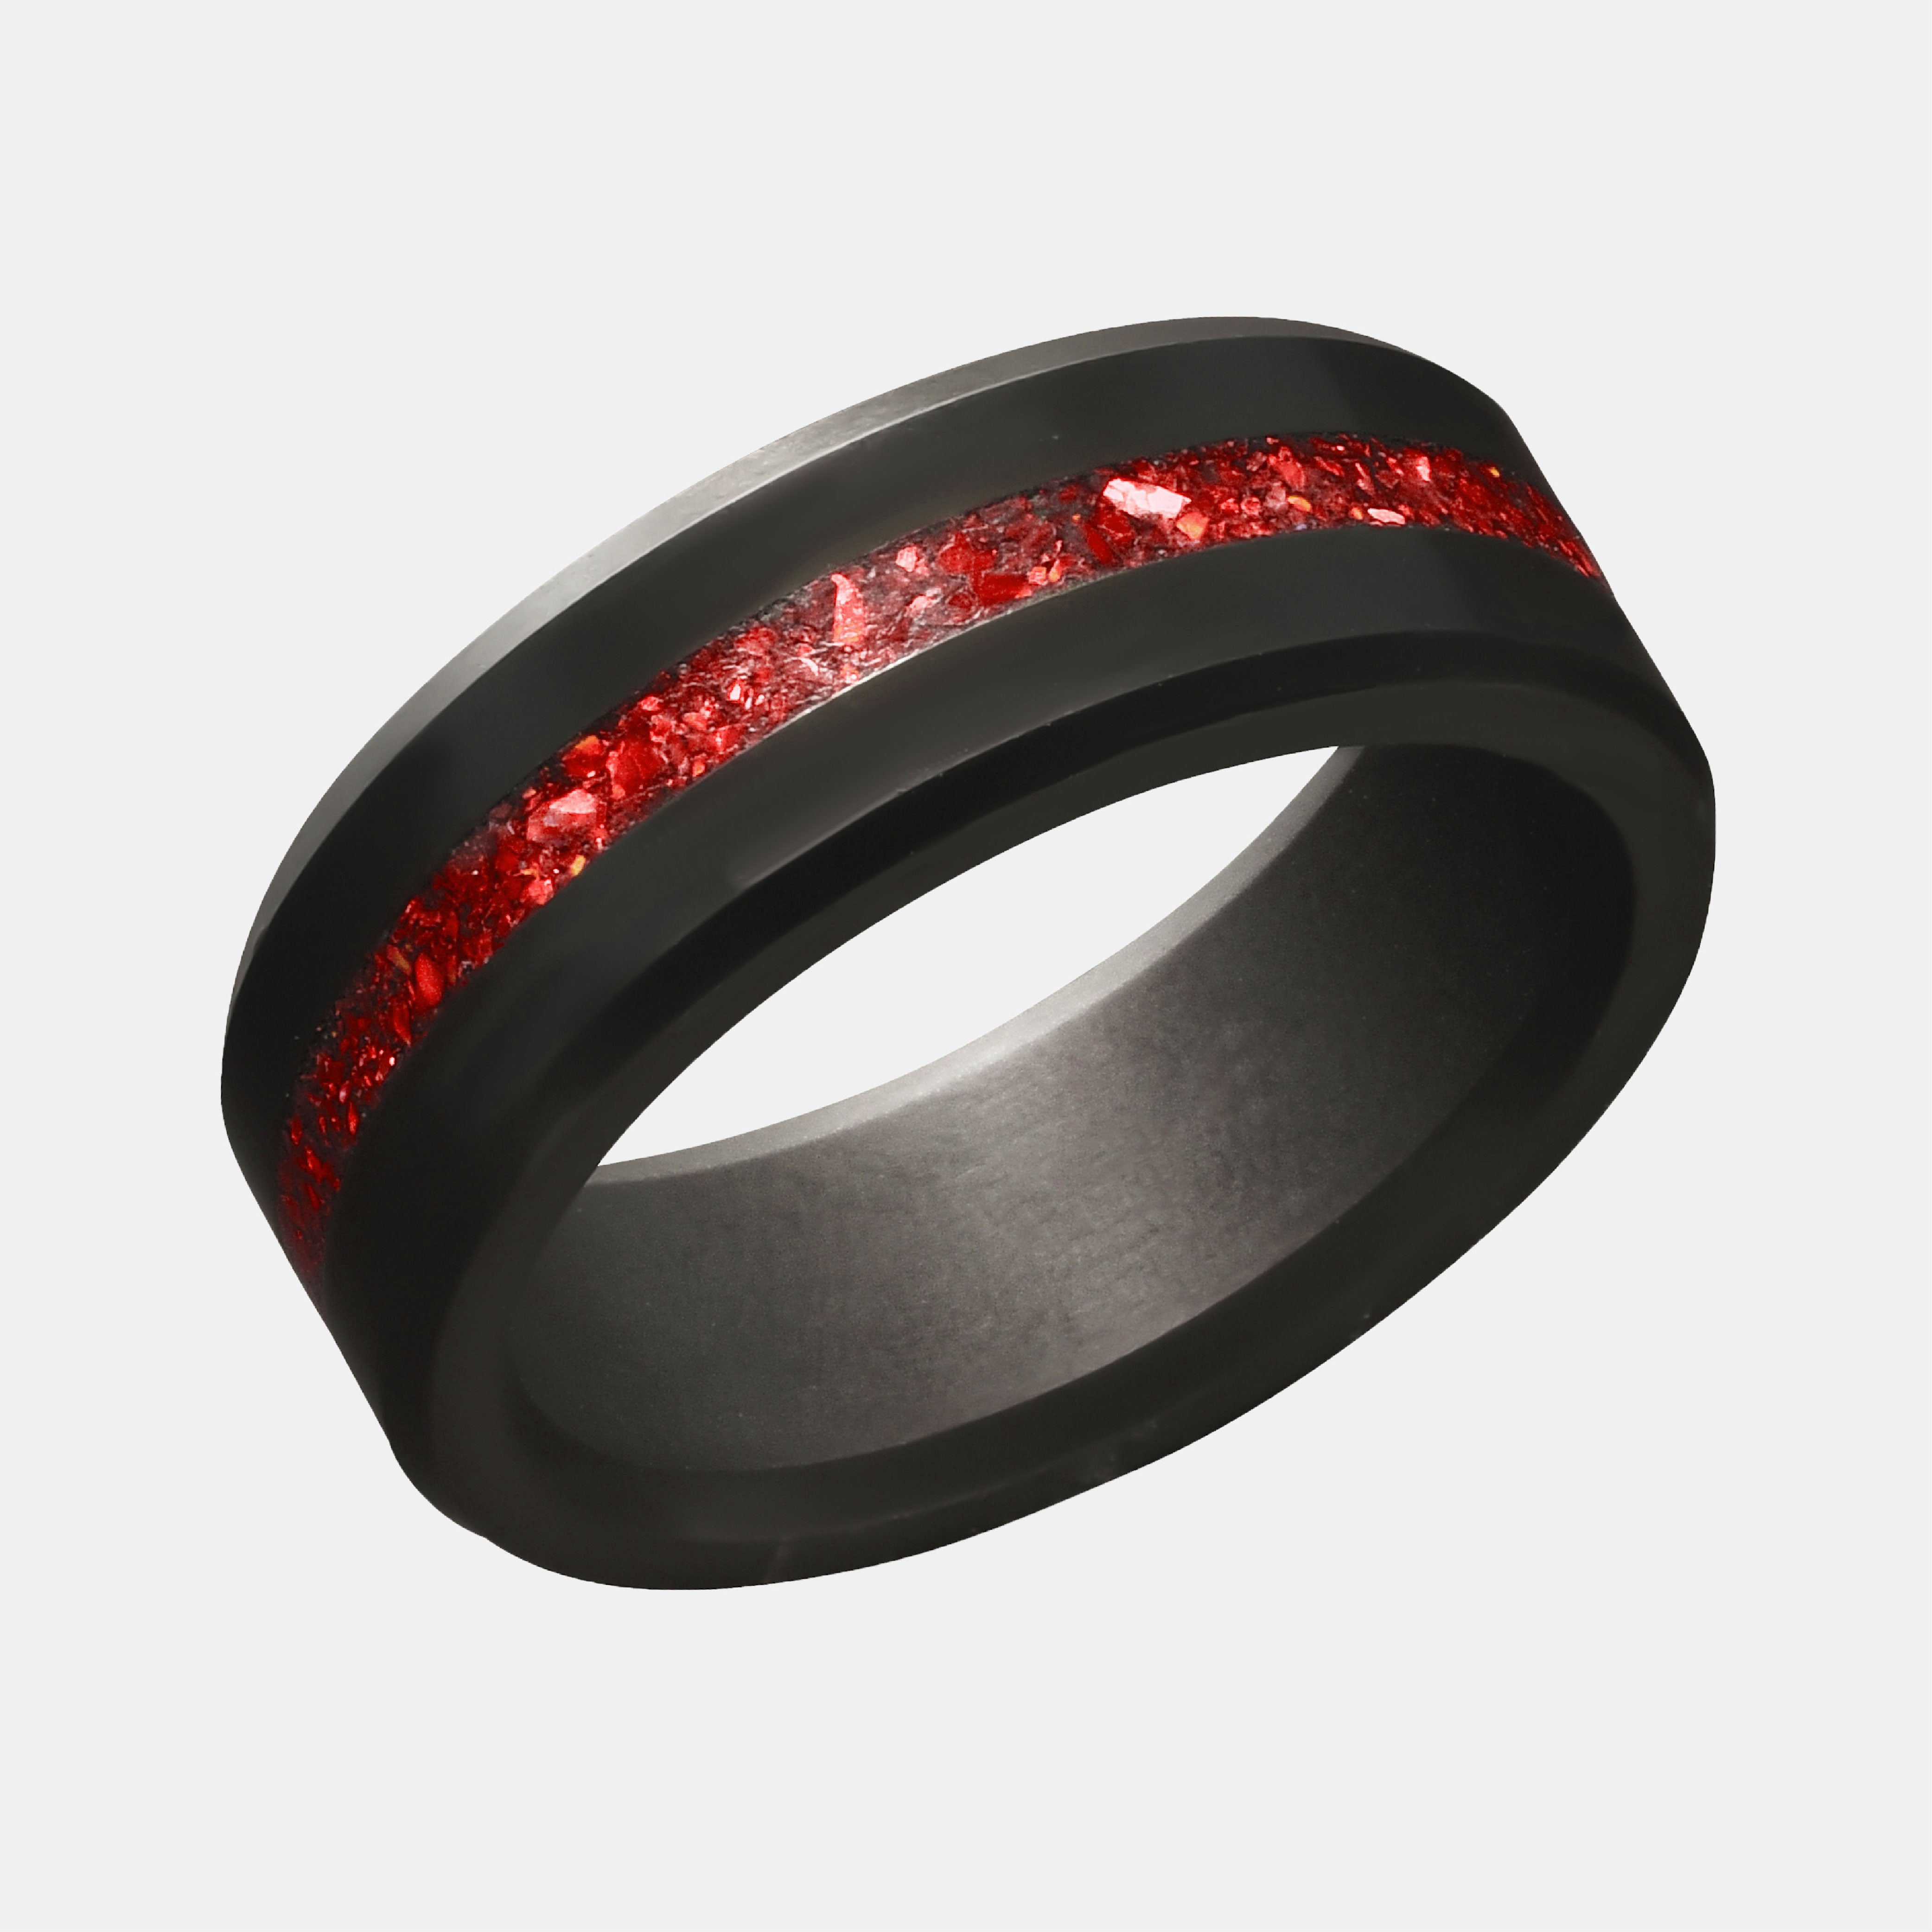 Men's Black Diamond & Red Opal Ring with a white background | Elysium ARES | ElysiumBlack.com | Men’s Opal Rings | Opal Rings for Men | Fire Opal Ring